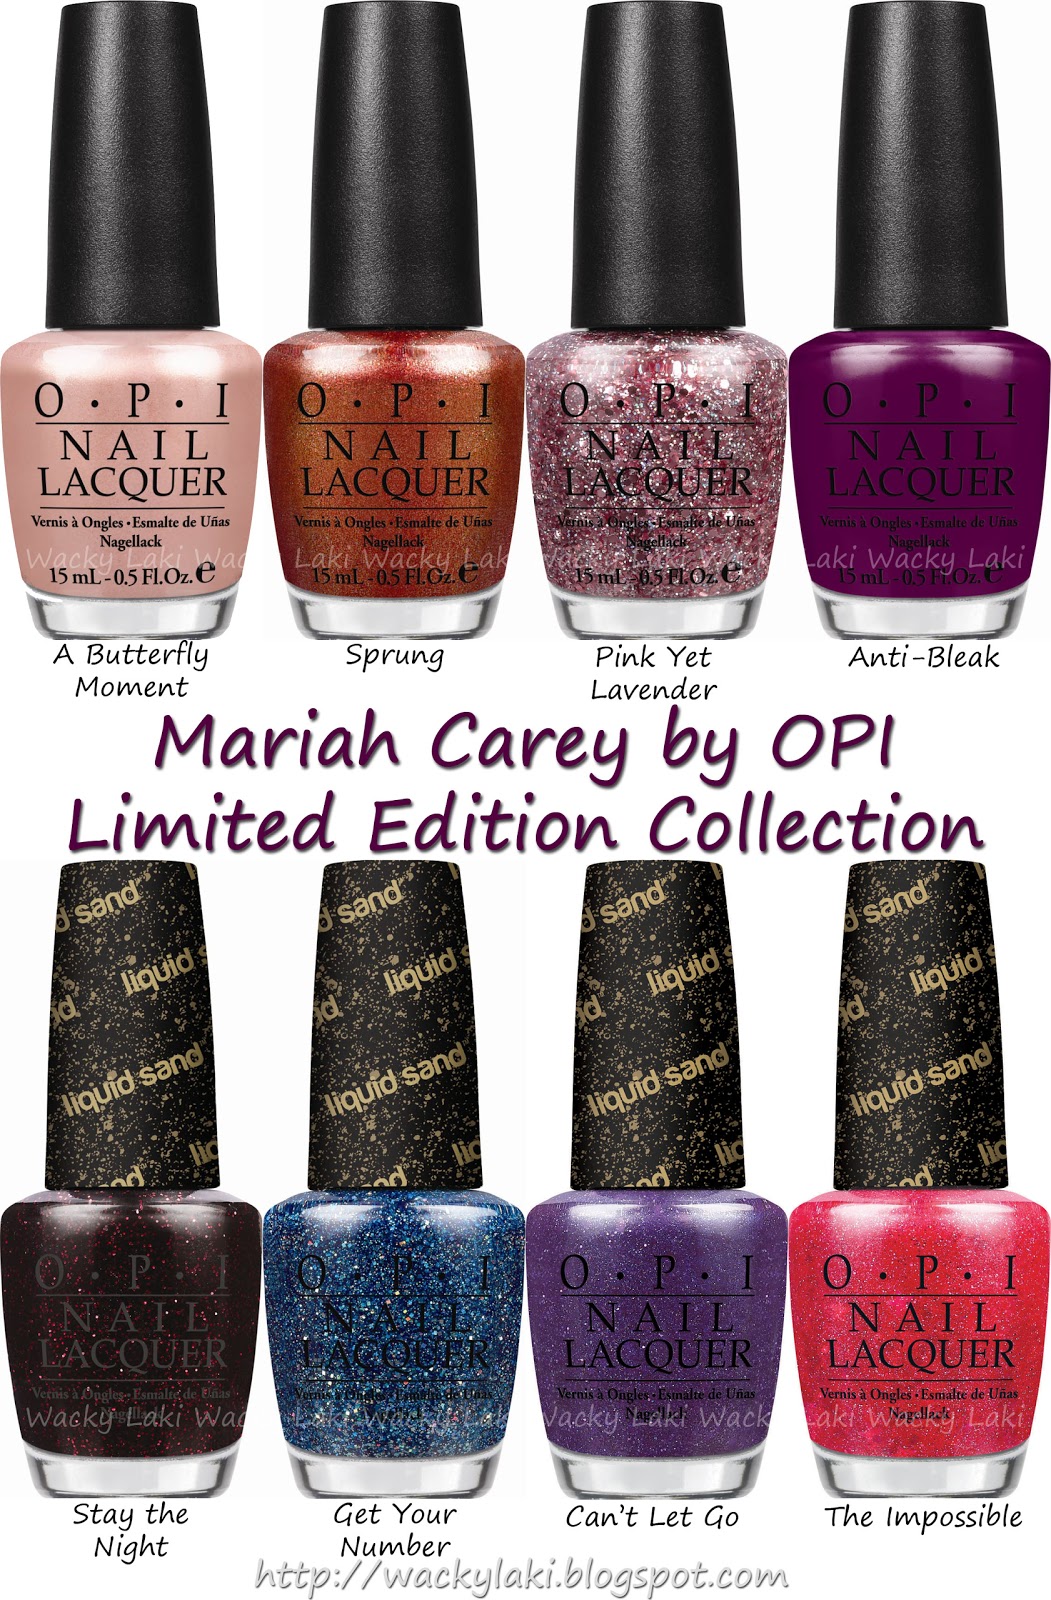 Wacky Laki Press Release Mariah Carey By Opi Collection